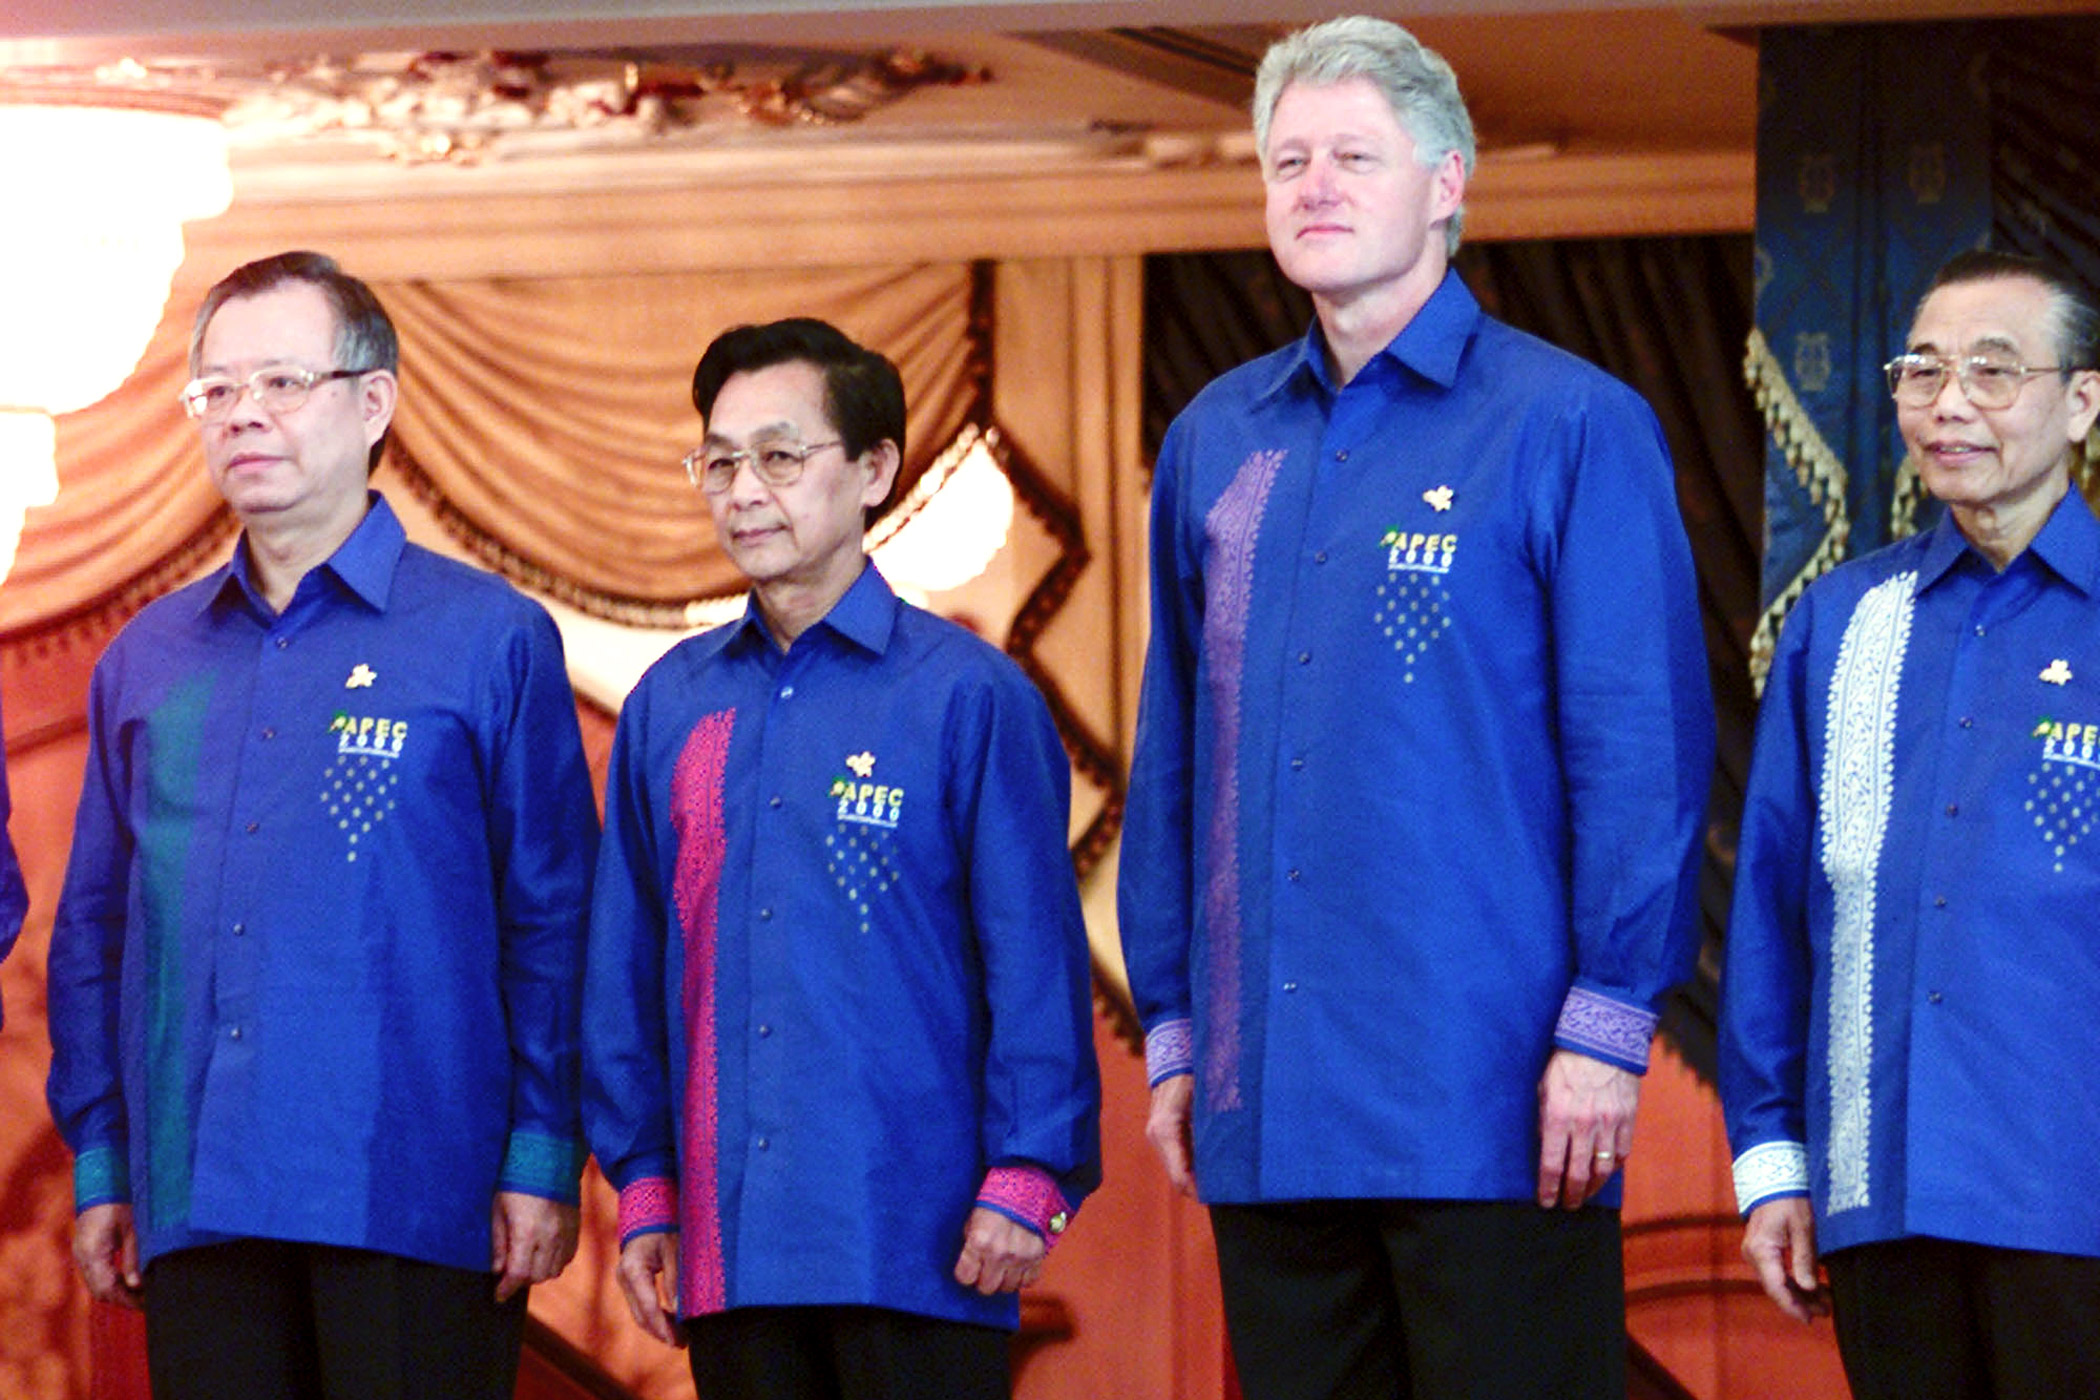 U.S. President Bill Clinton poses with leaders at the APEC Summit on Nov. 14, 2000 in Brunei Darussalam.